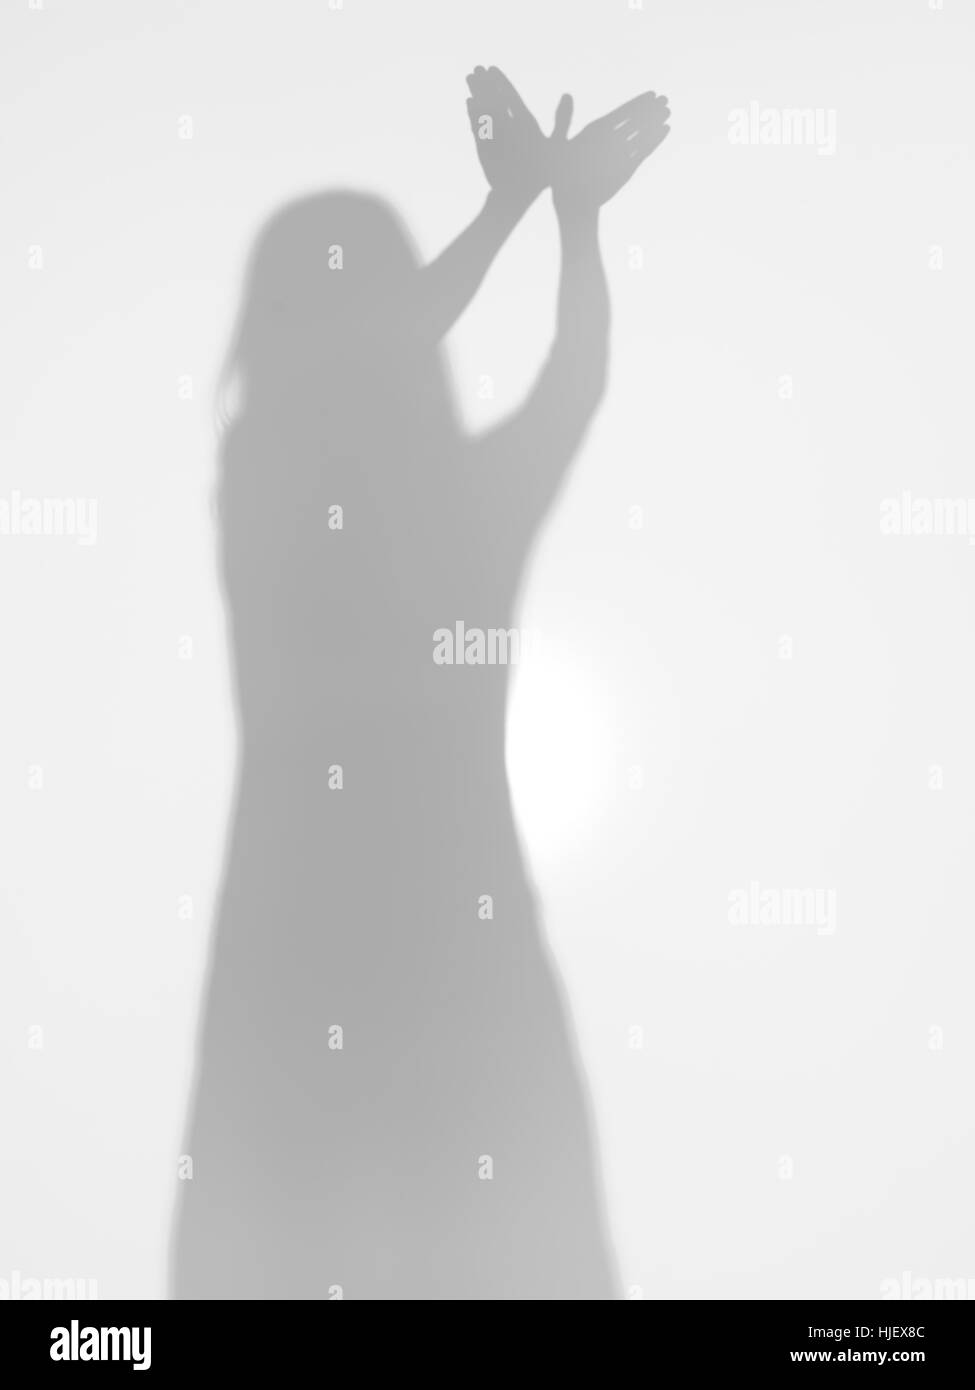 woman, sign, signal, gesture, hand, finger, model, design, project, concept, Stock Photo